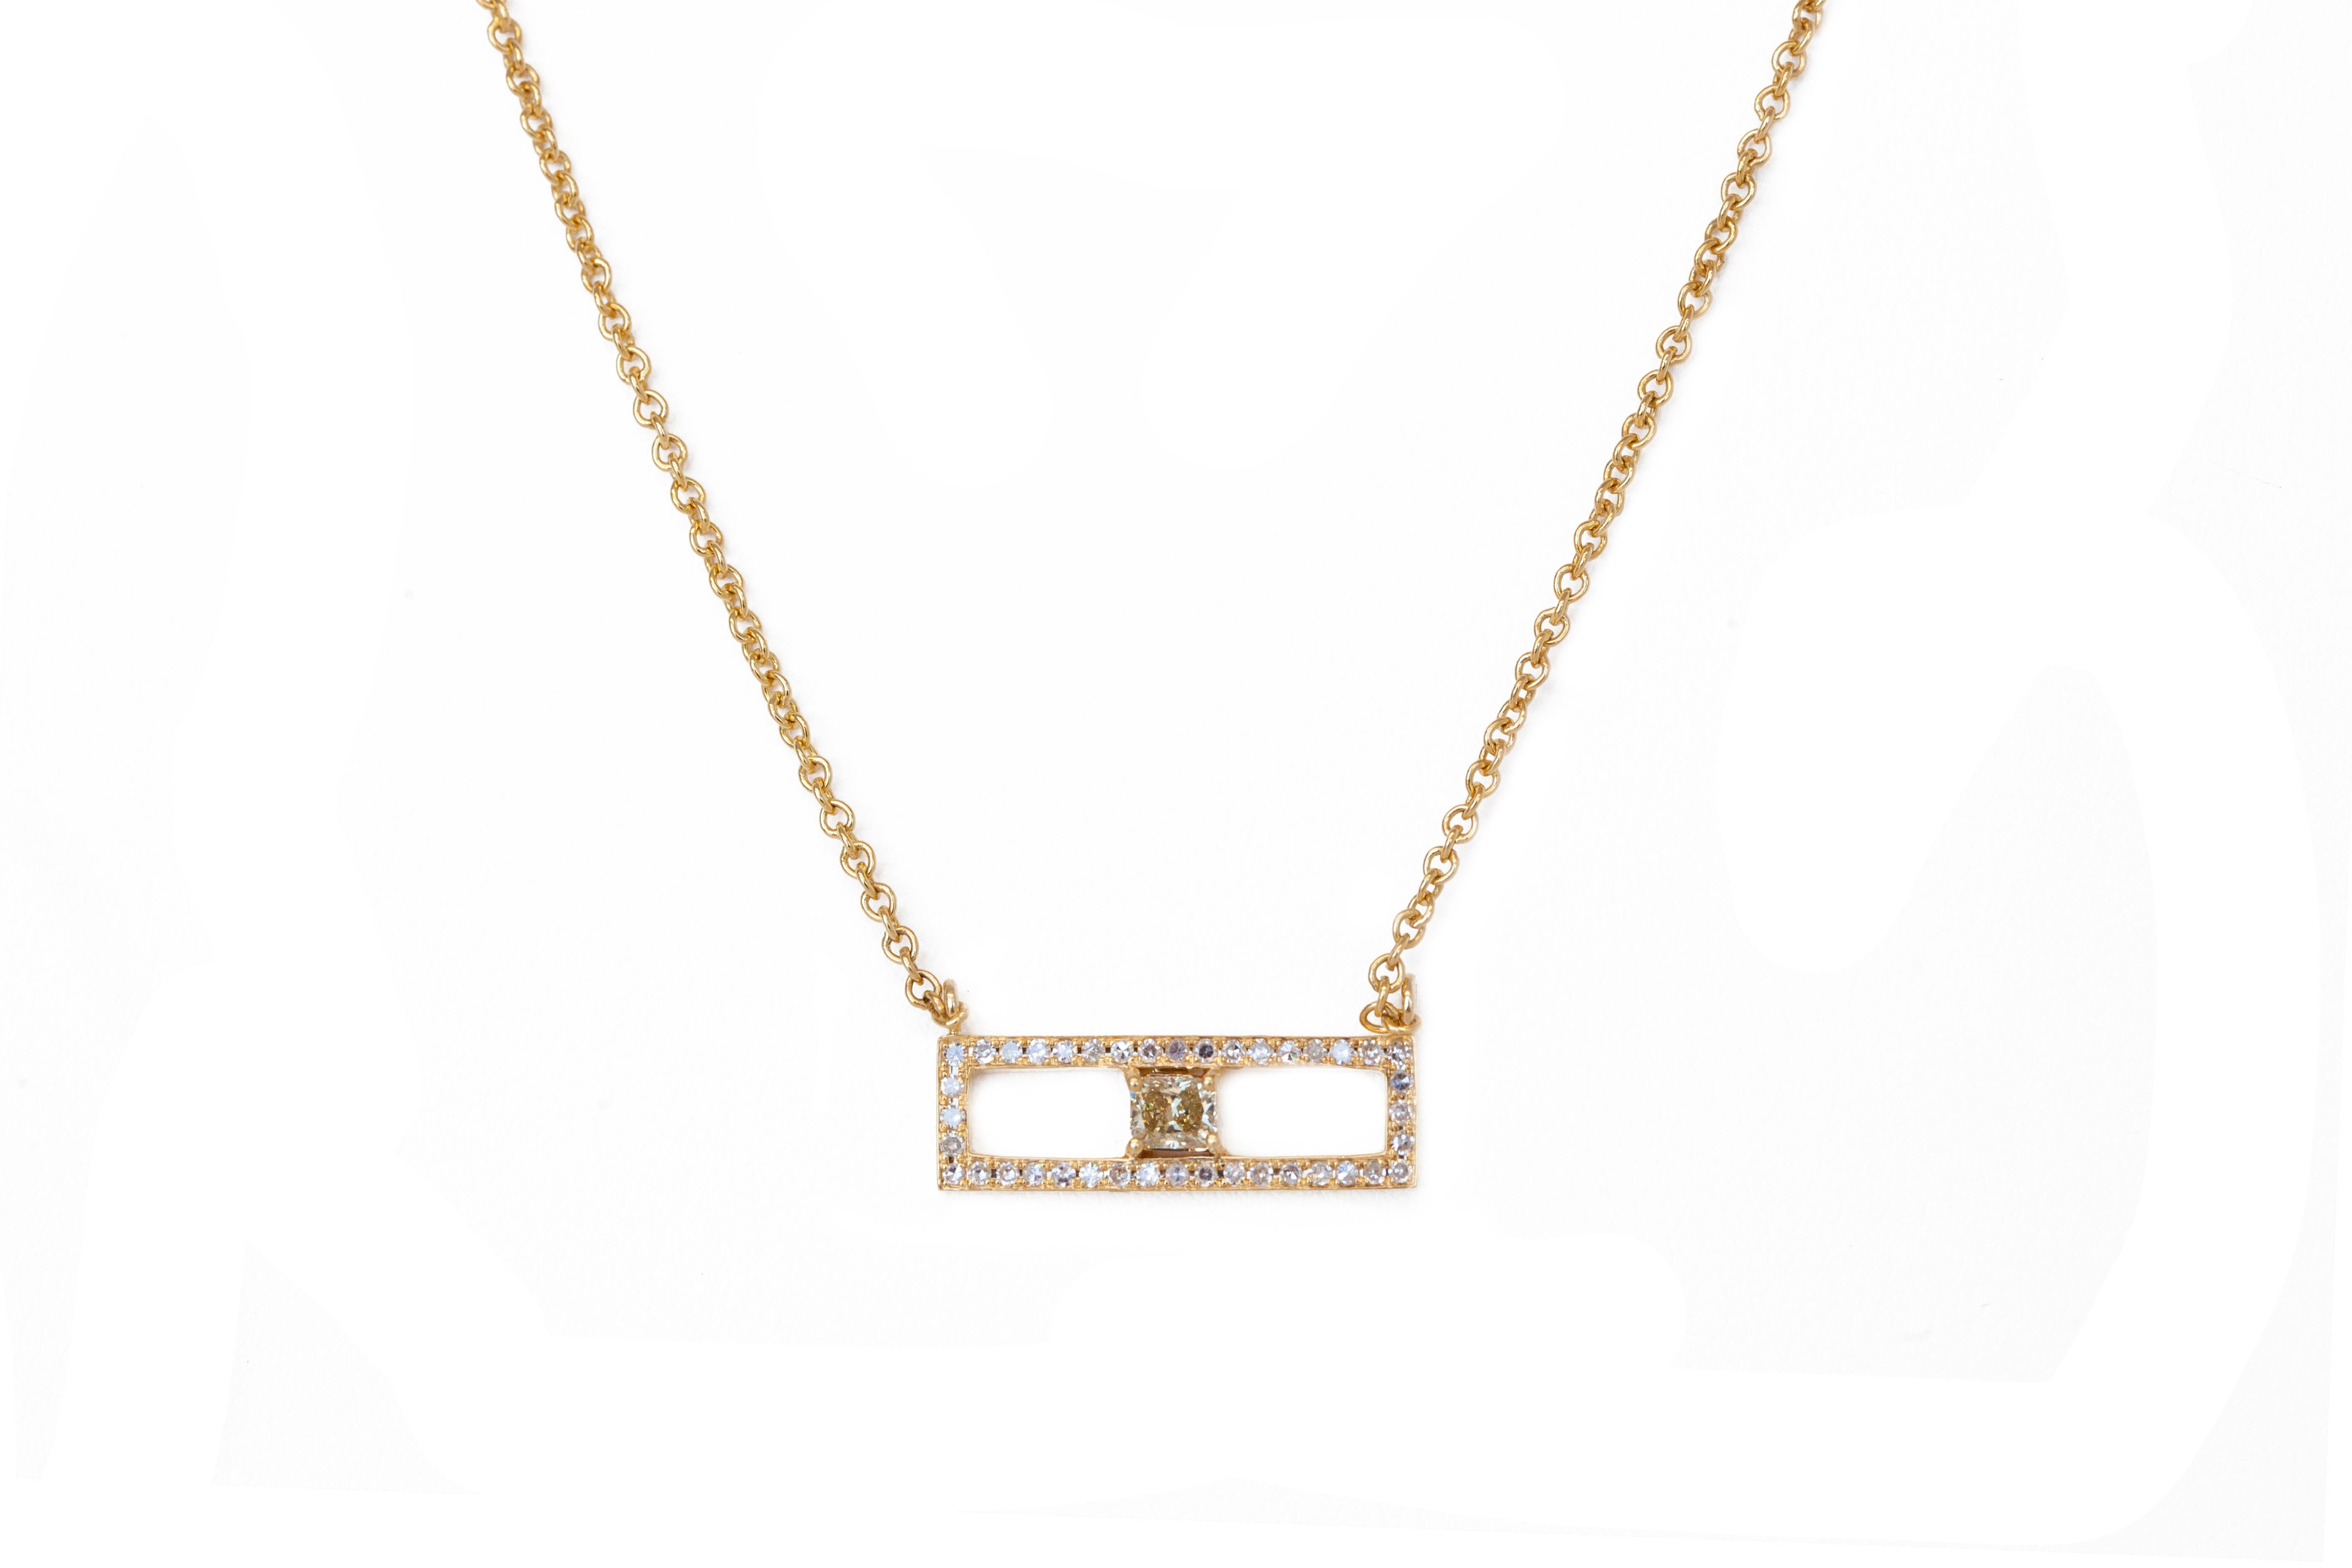 Rectangular diamond bar necklace with fancy yellow colored diamond in 18k yellow gold. 